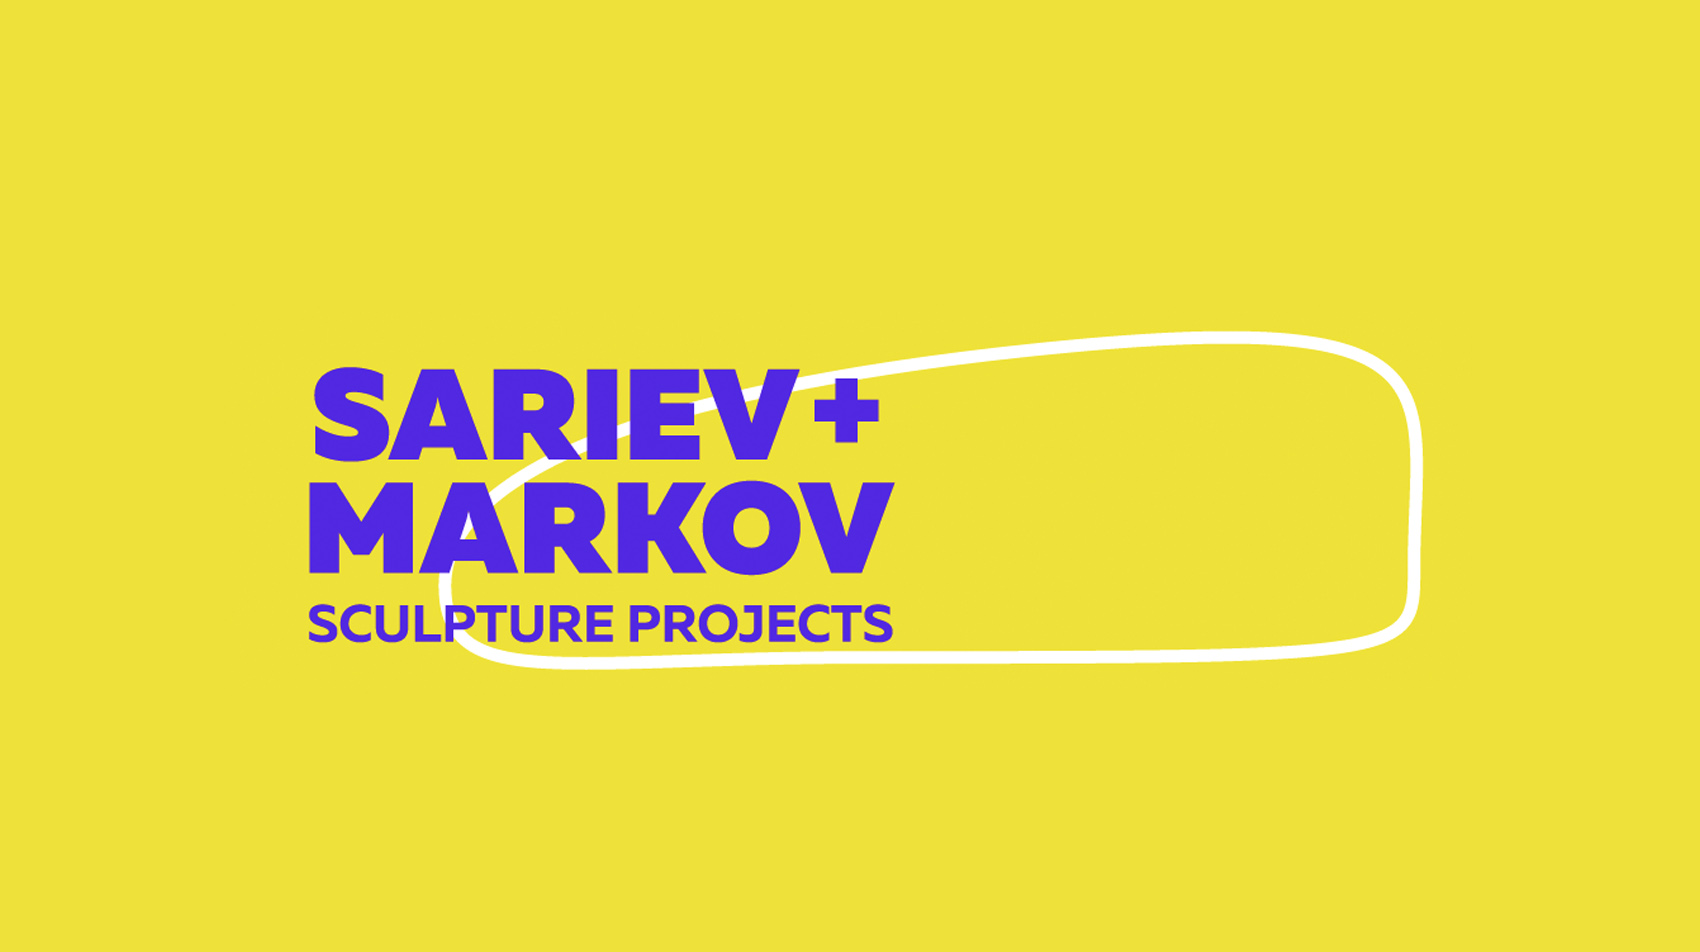 Project: Sariev + Markov sculpture projects